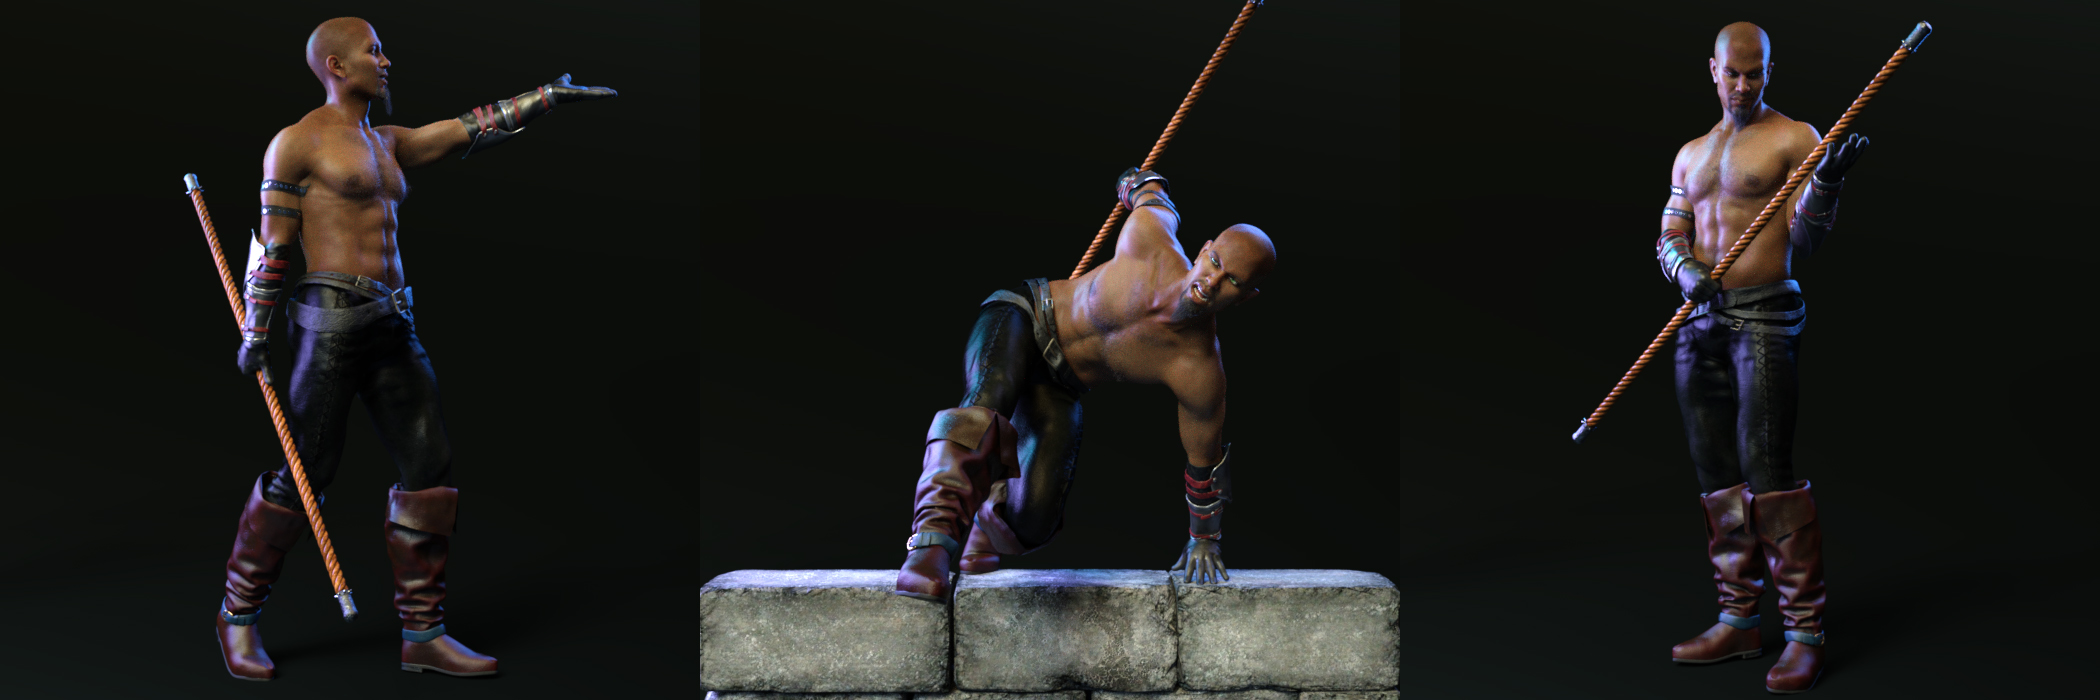 Melee Strike Poses Expressions And Prop For Genesis 8 Daz 3d